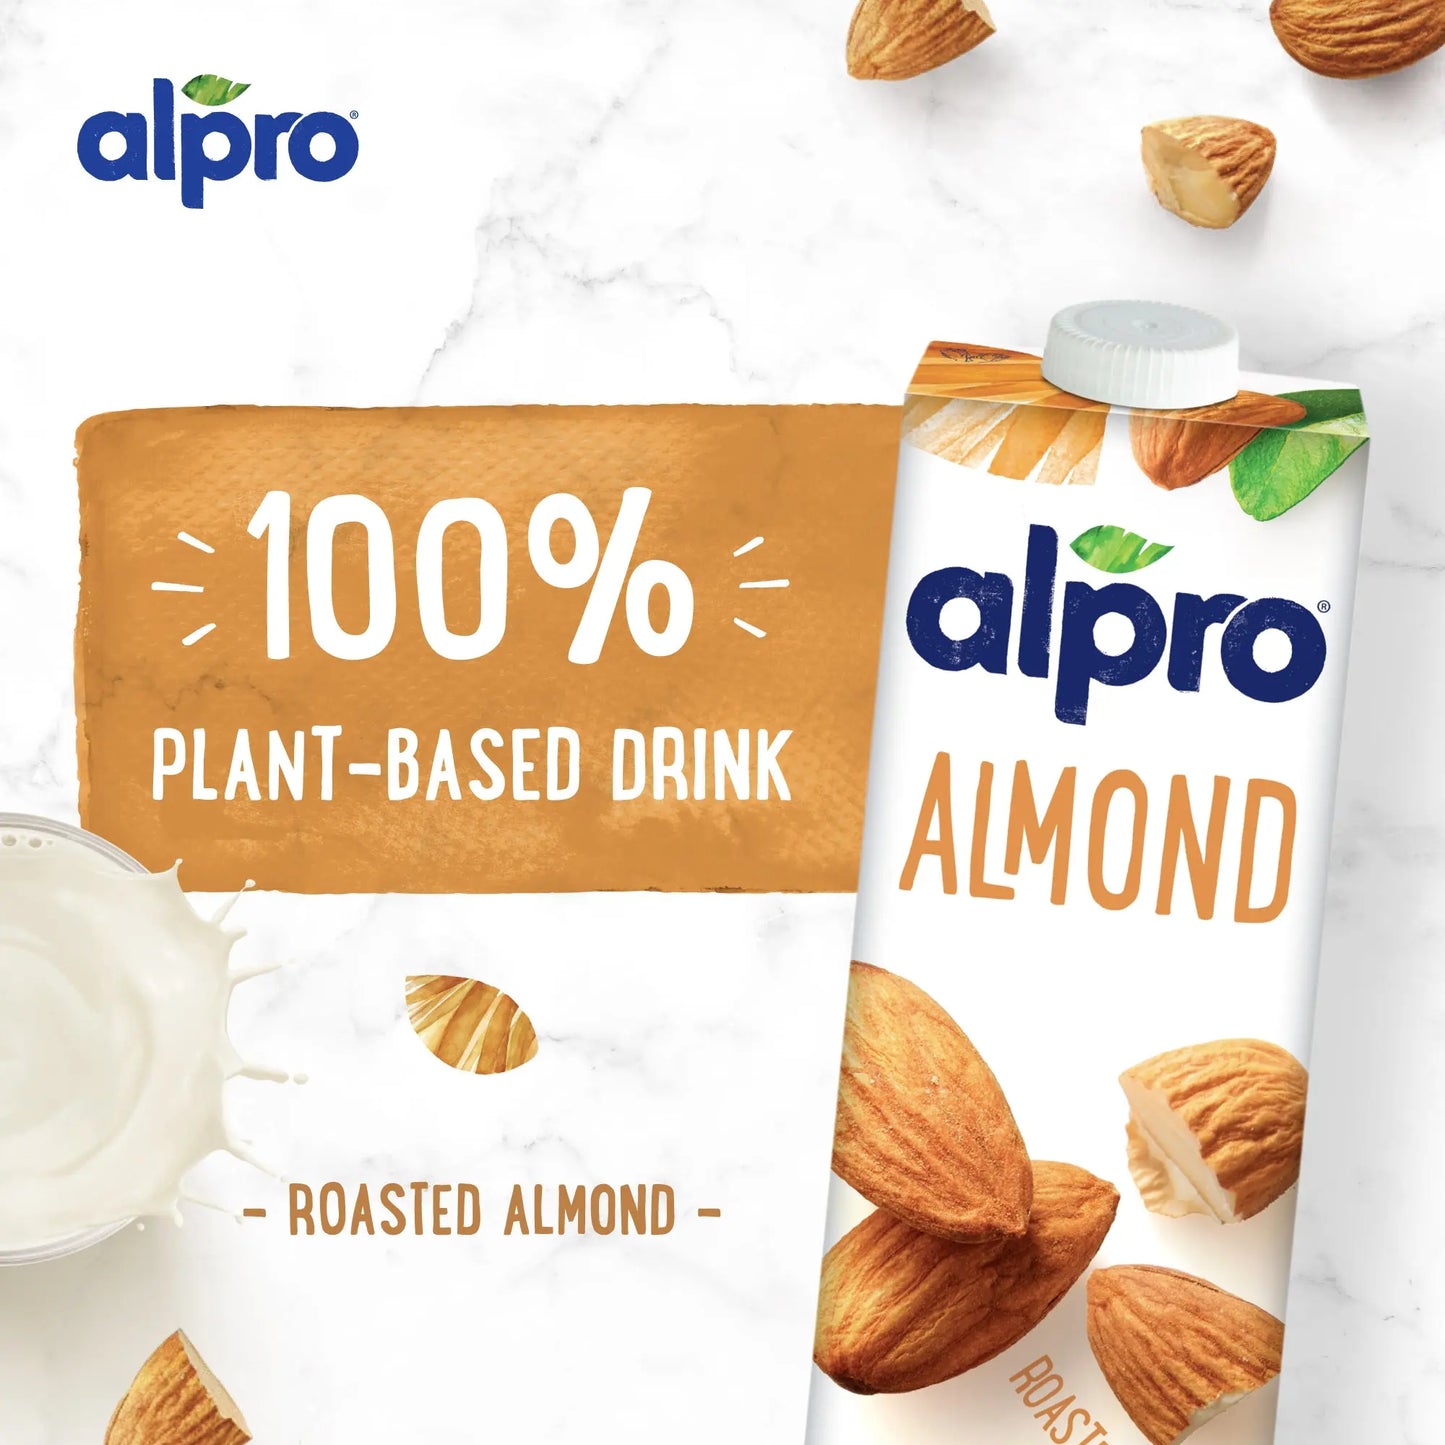 Alpro Almond  Drink, Dual Pack (1l x 2) 100% Plant Based And Gluten & Dairy Free, Suitable For Vegans, Naturally Free From Lactose, Rich In Nutrients Alpro